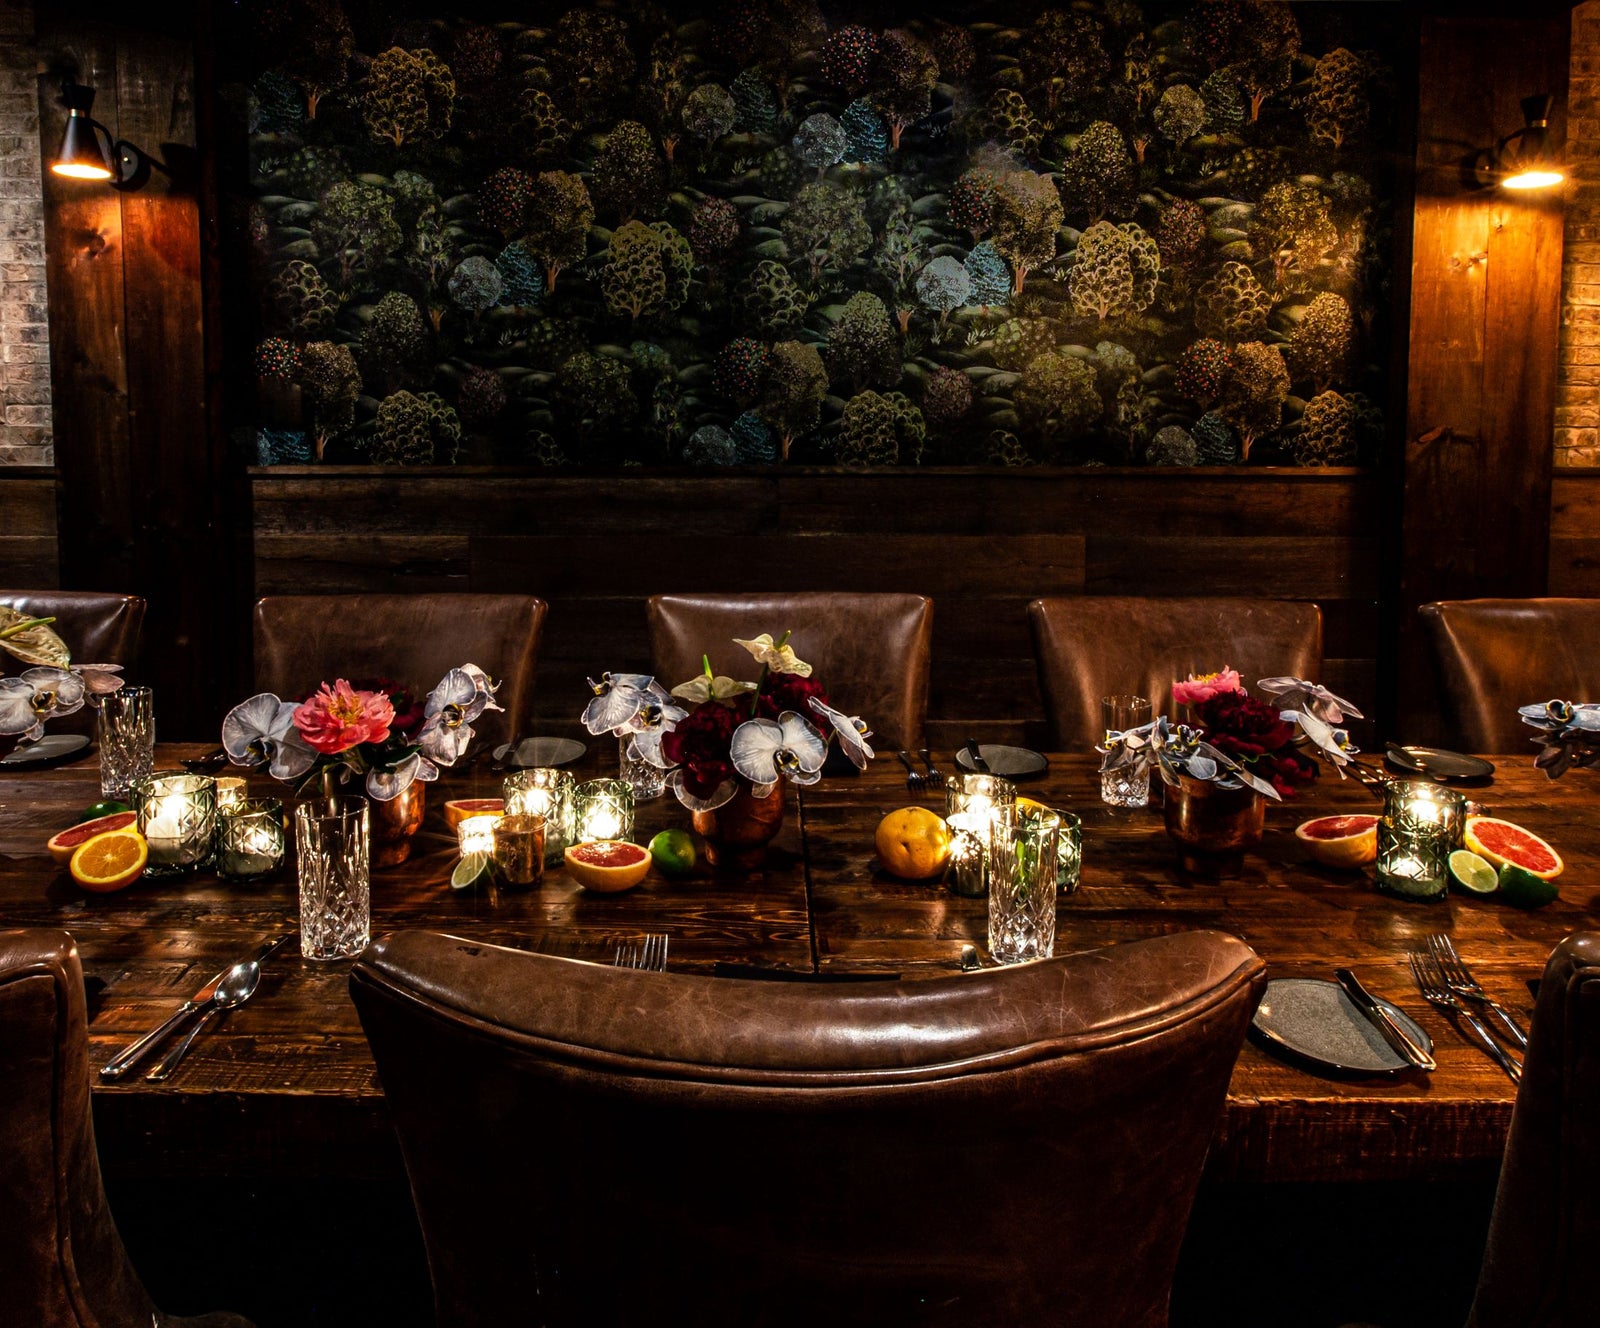 forest wallpaper in the avvino private dining room redesign with stacy k floral